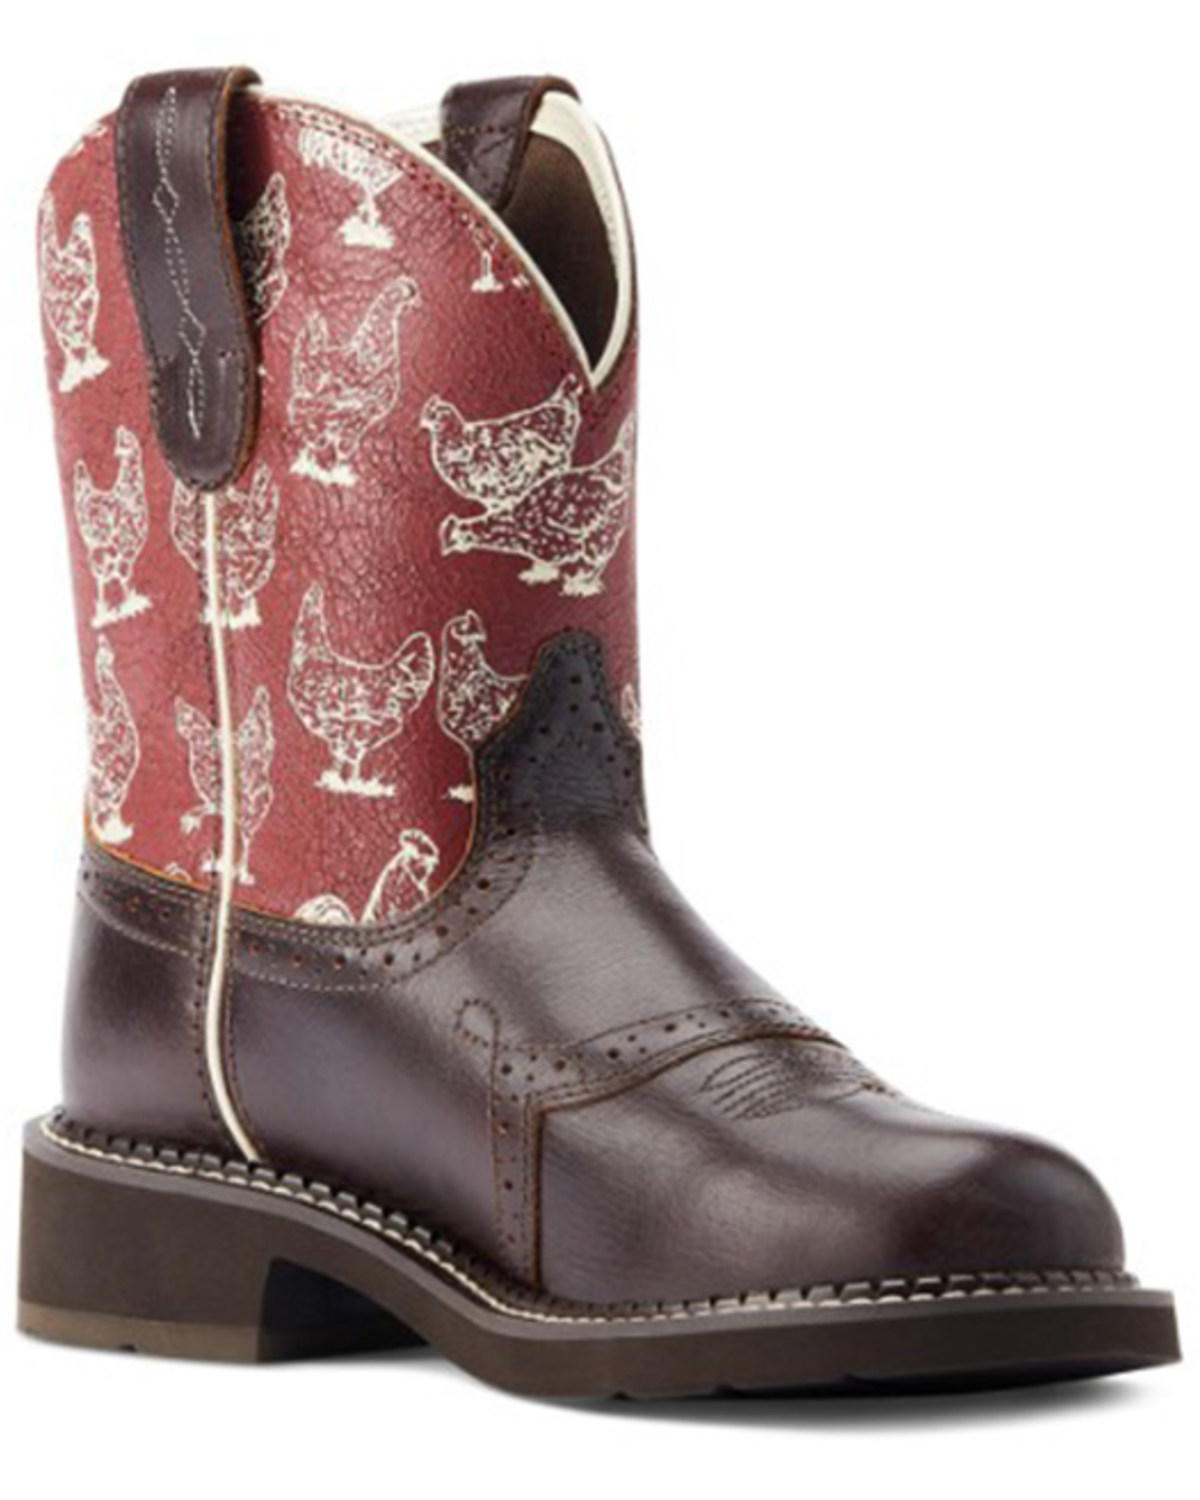 Ariat Women's Fatbaby Heritage Farrah Western Boots - Round Toe